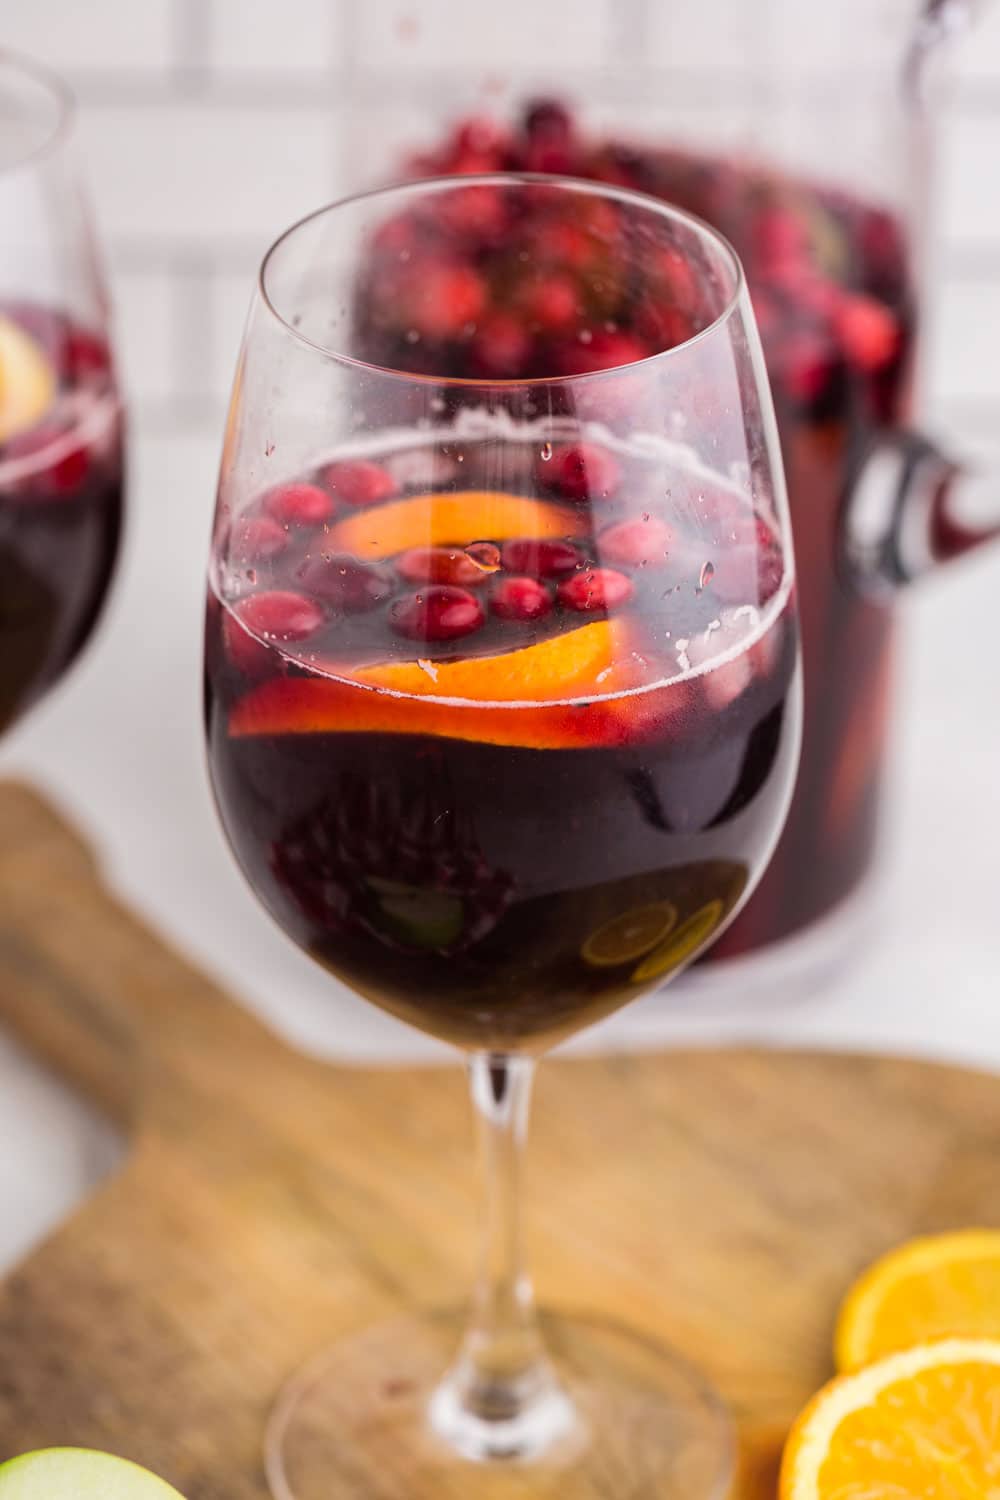 Two wine glasses filled with Red Sangria on a wooden kitchen board, sliced orange, glass pitcher in the background, with white subway tiles.